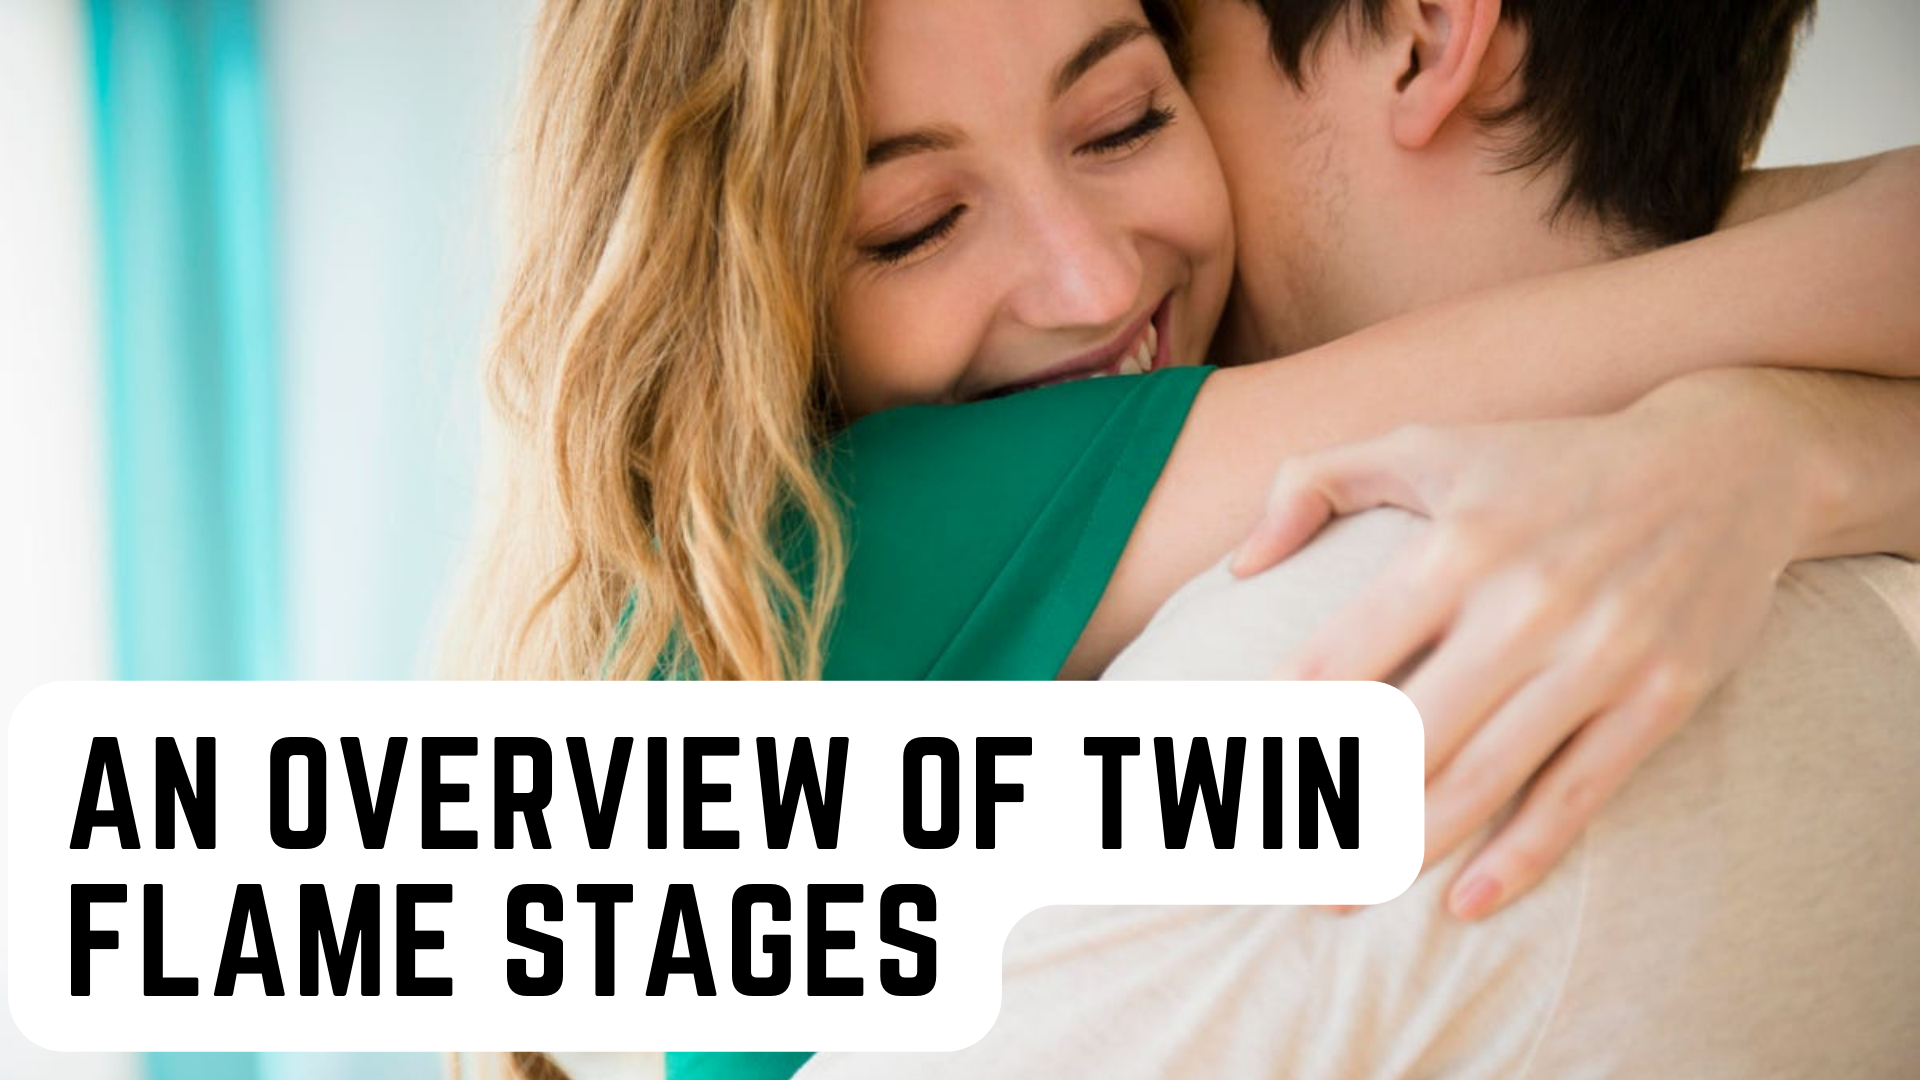 Couple hugging each other with words An Overview Of Twin Flame Stages